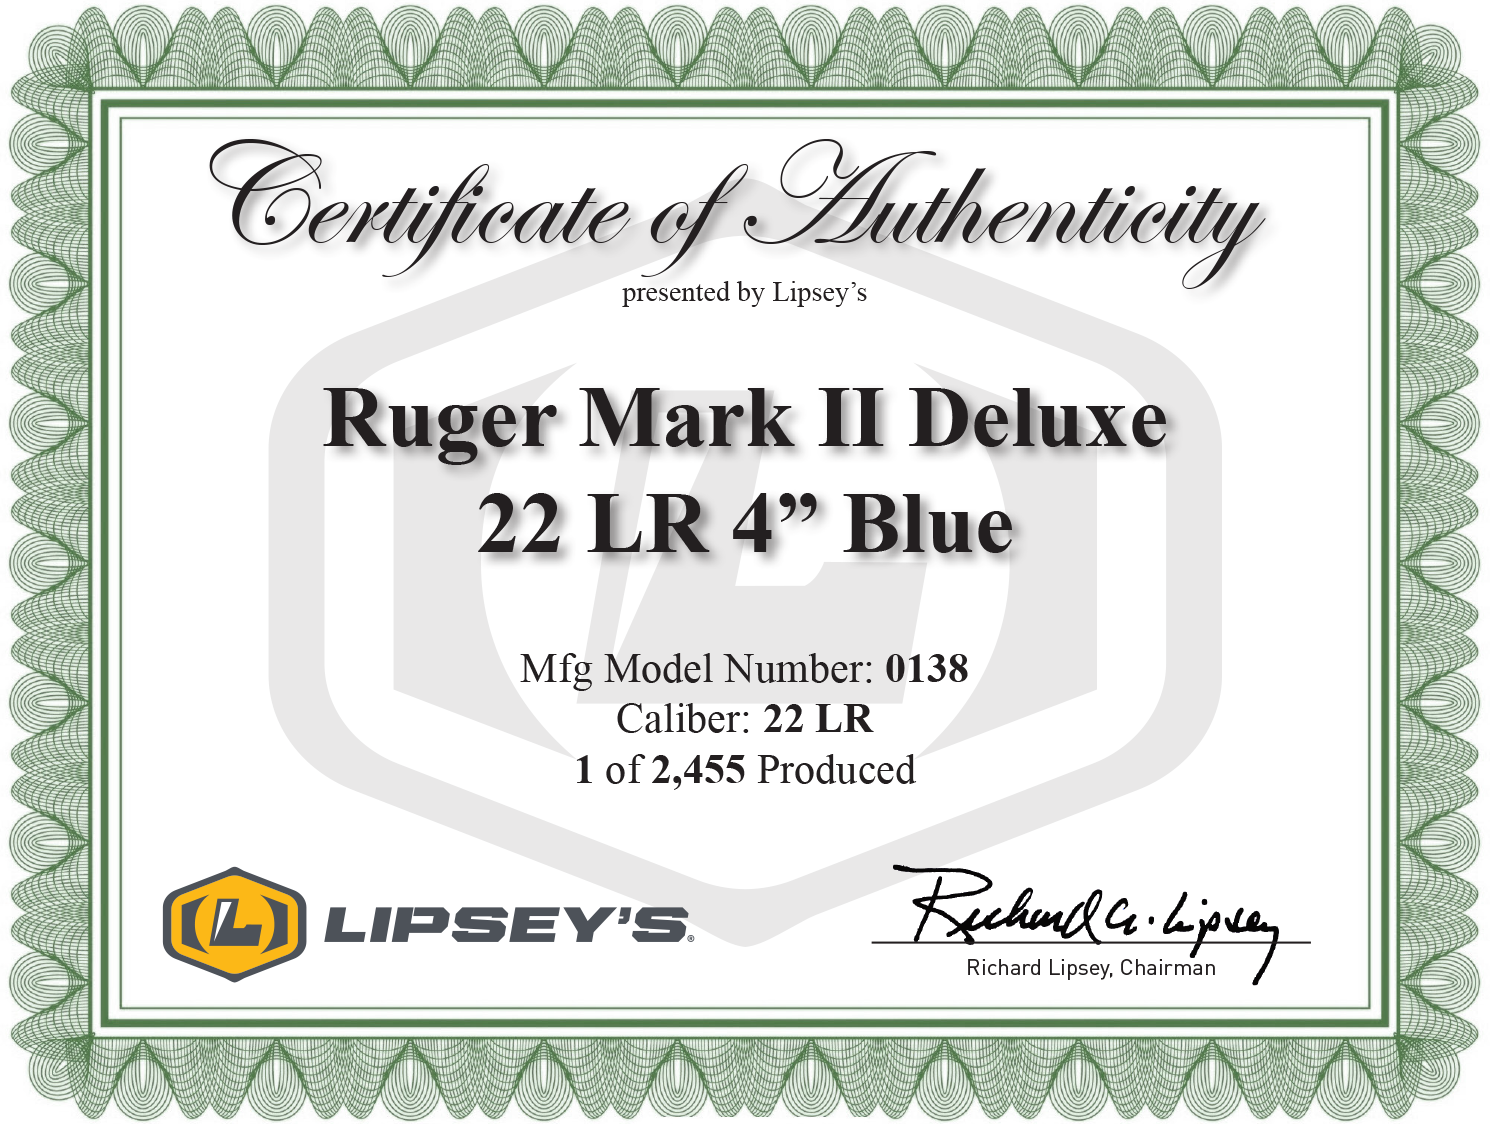 Lipsey's Exclusive Ruger Mark II Deluxe Certificate of Authenticity